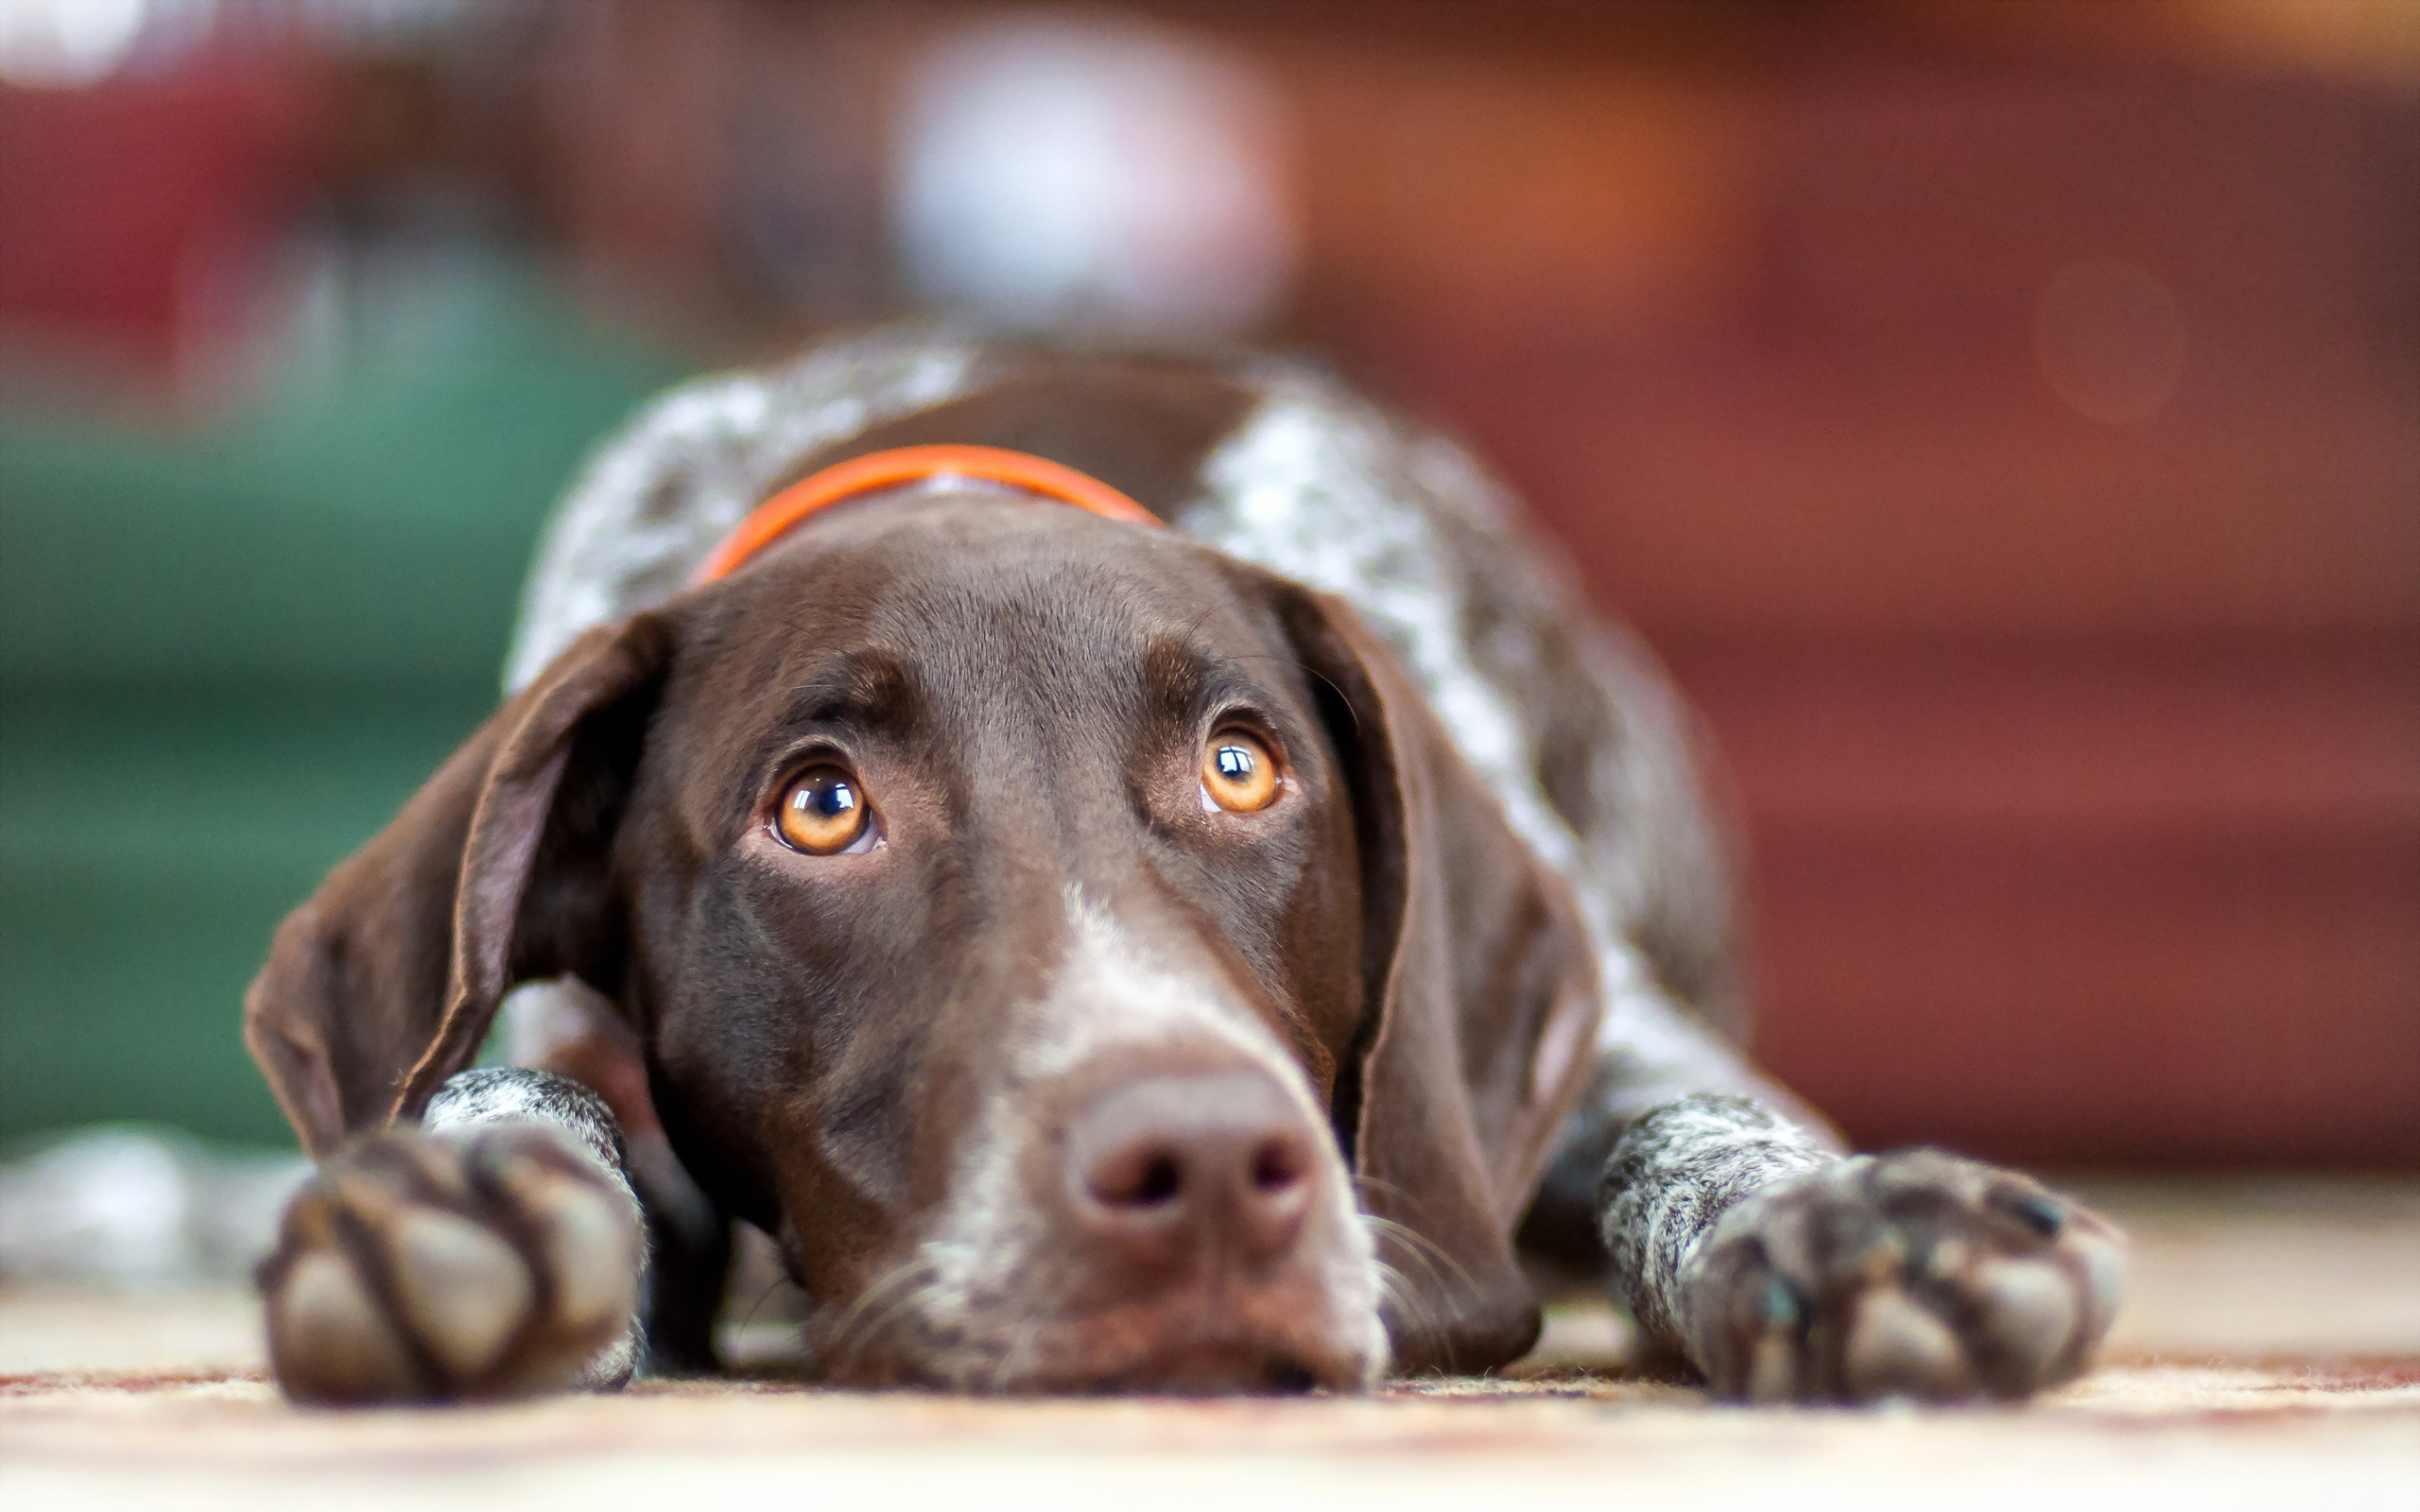 Download Wallpaper German Shorthaired Pointer, Close Up, Pets, Dogs, Cute Animals, German Shorthaired Pointer Dog For Desktop With Resolution 412x732. High Quality HD Picture Wallpaper